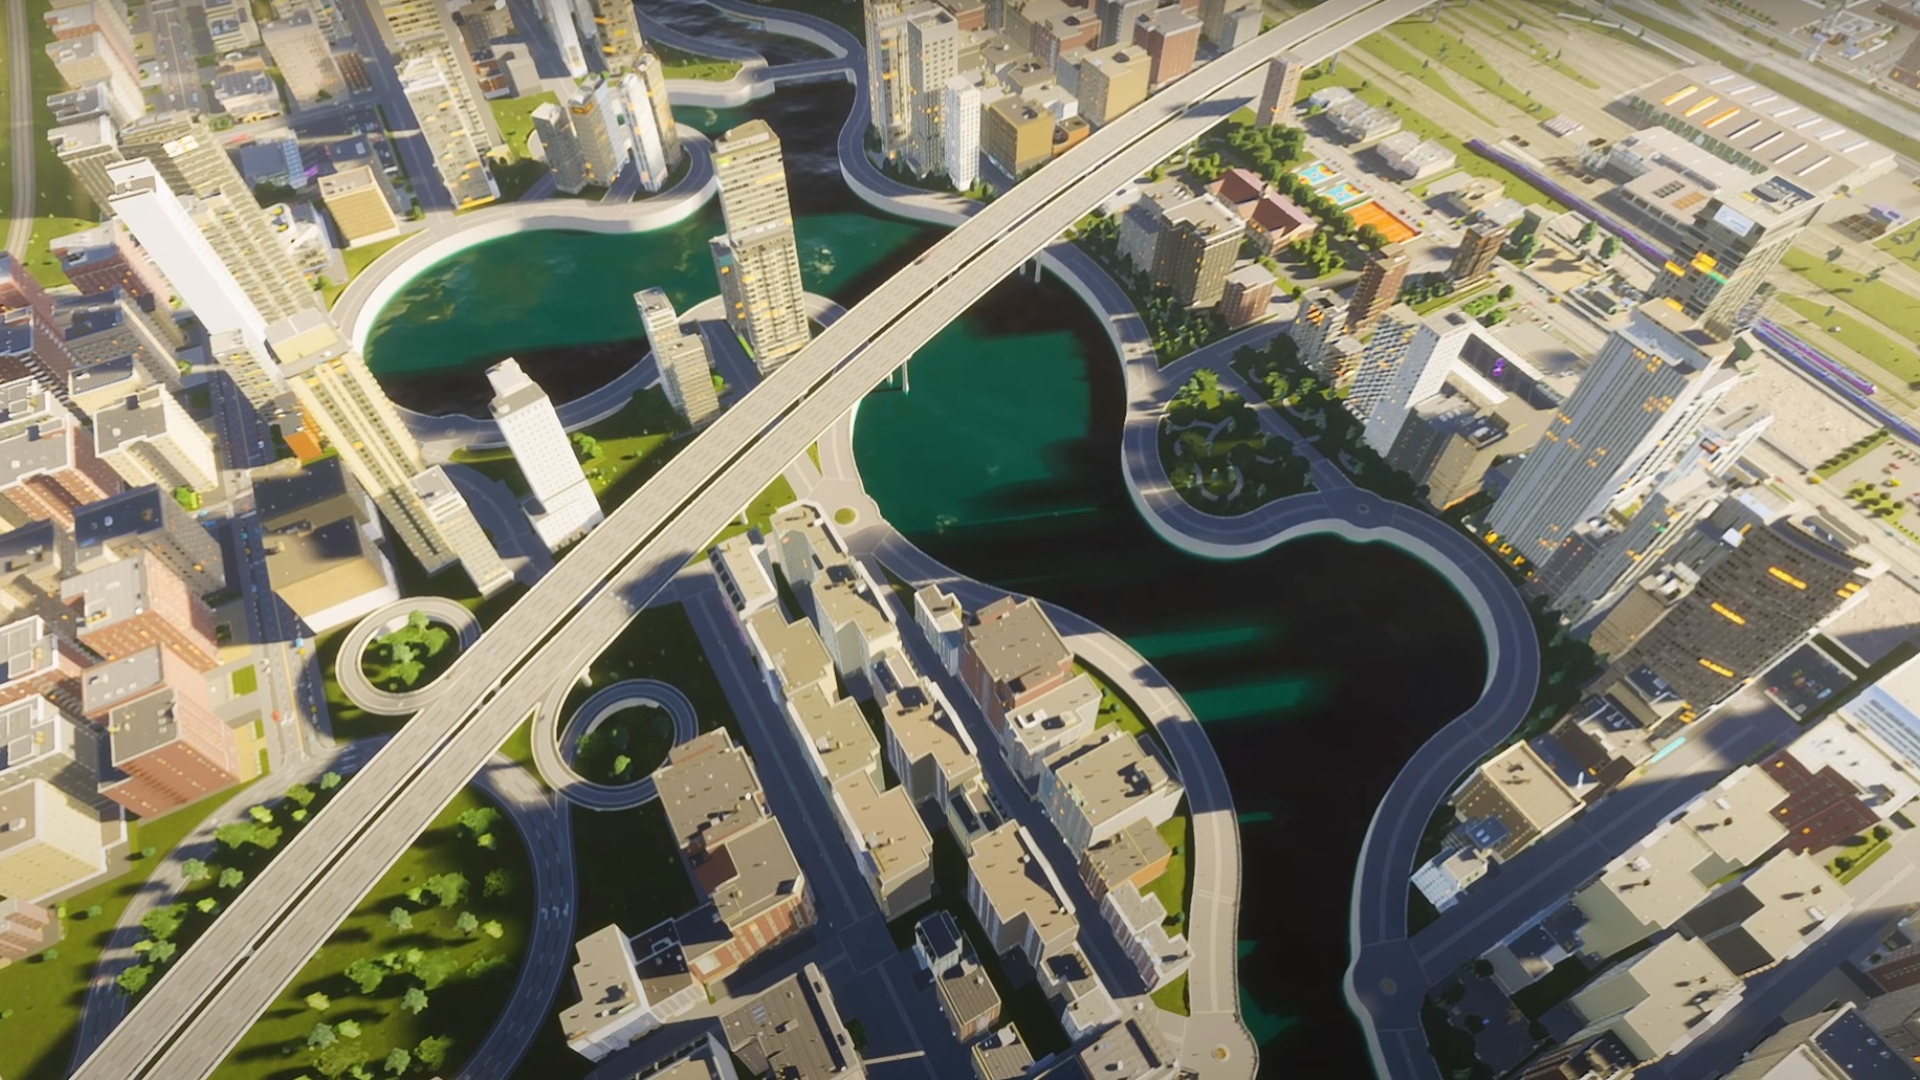 Cities: Skylines 2 review